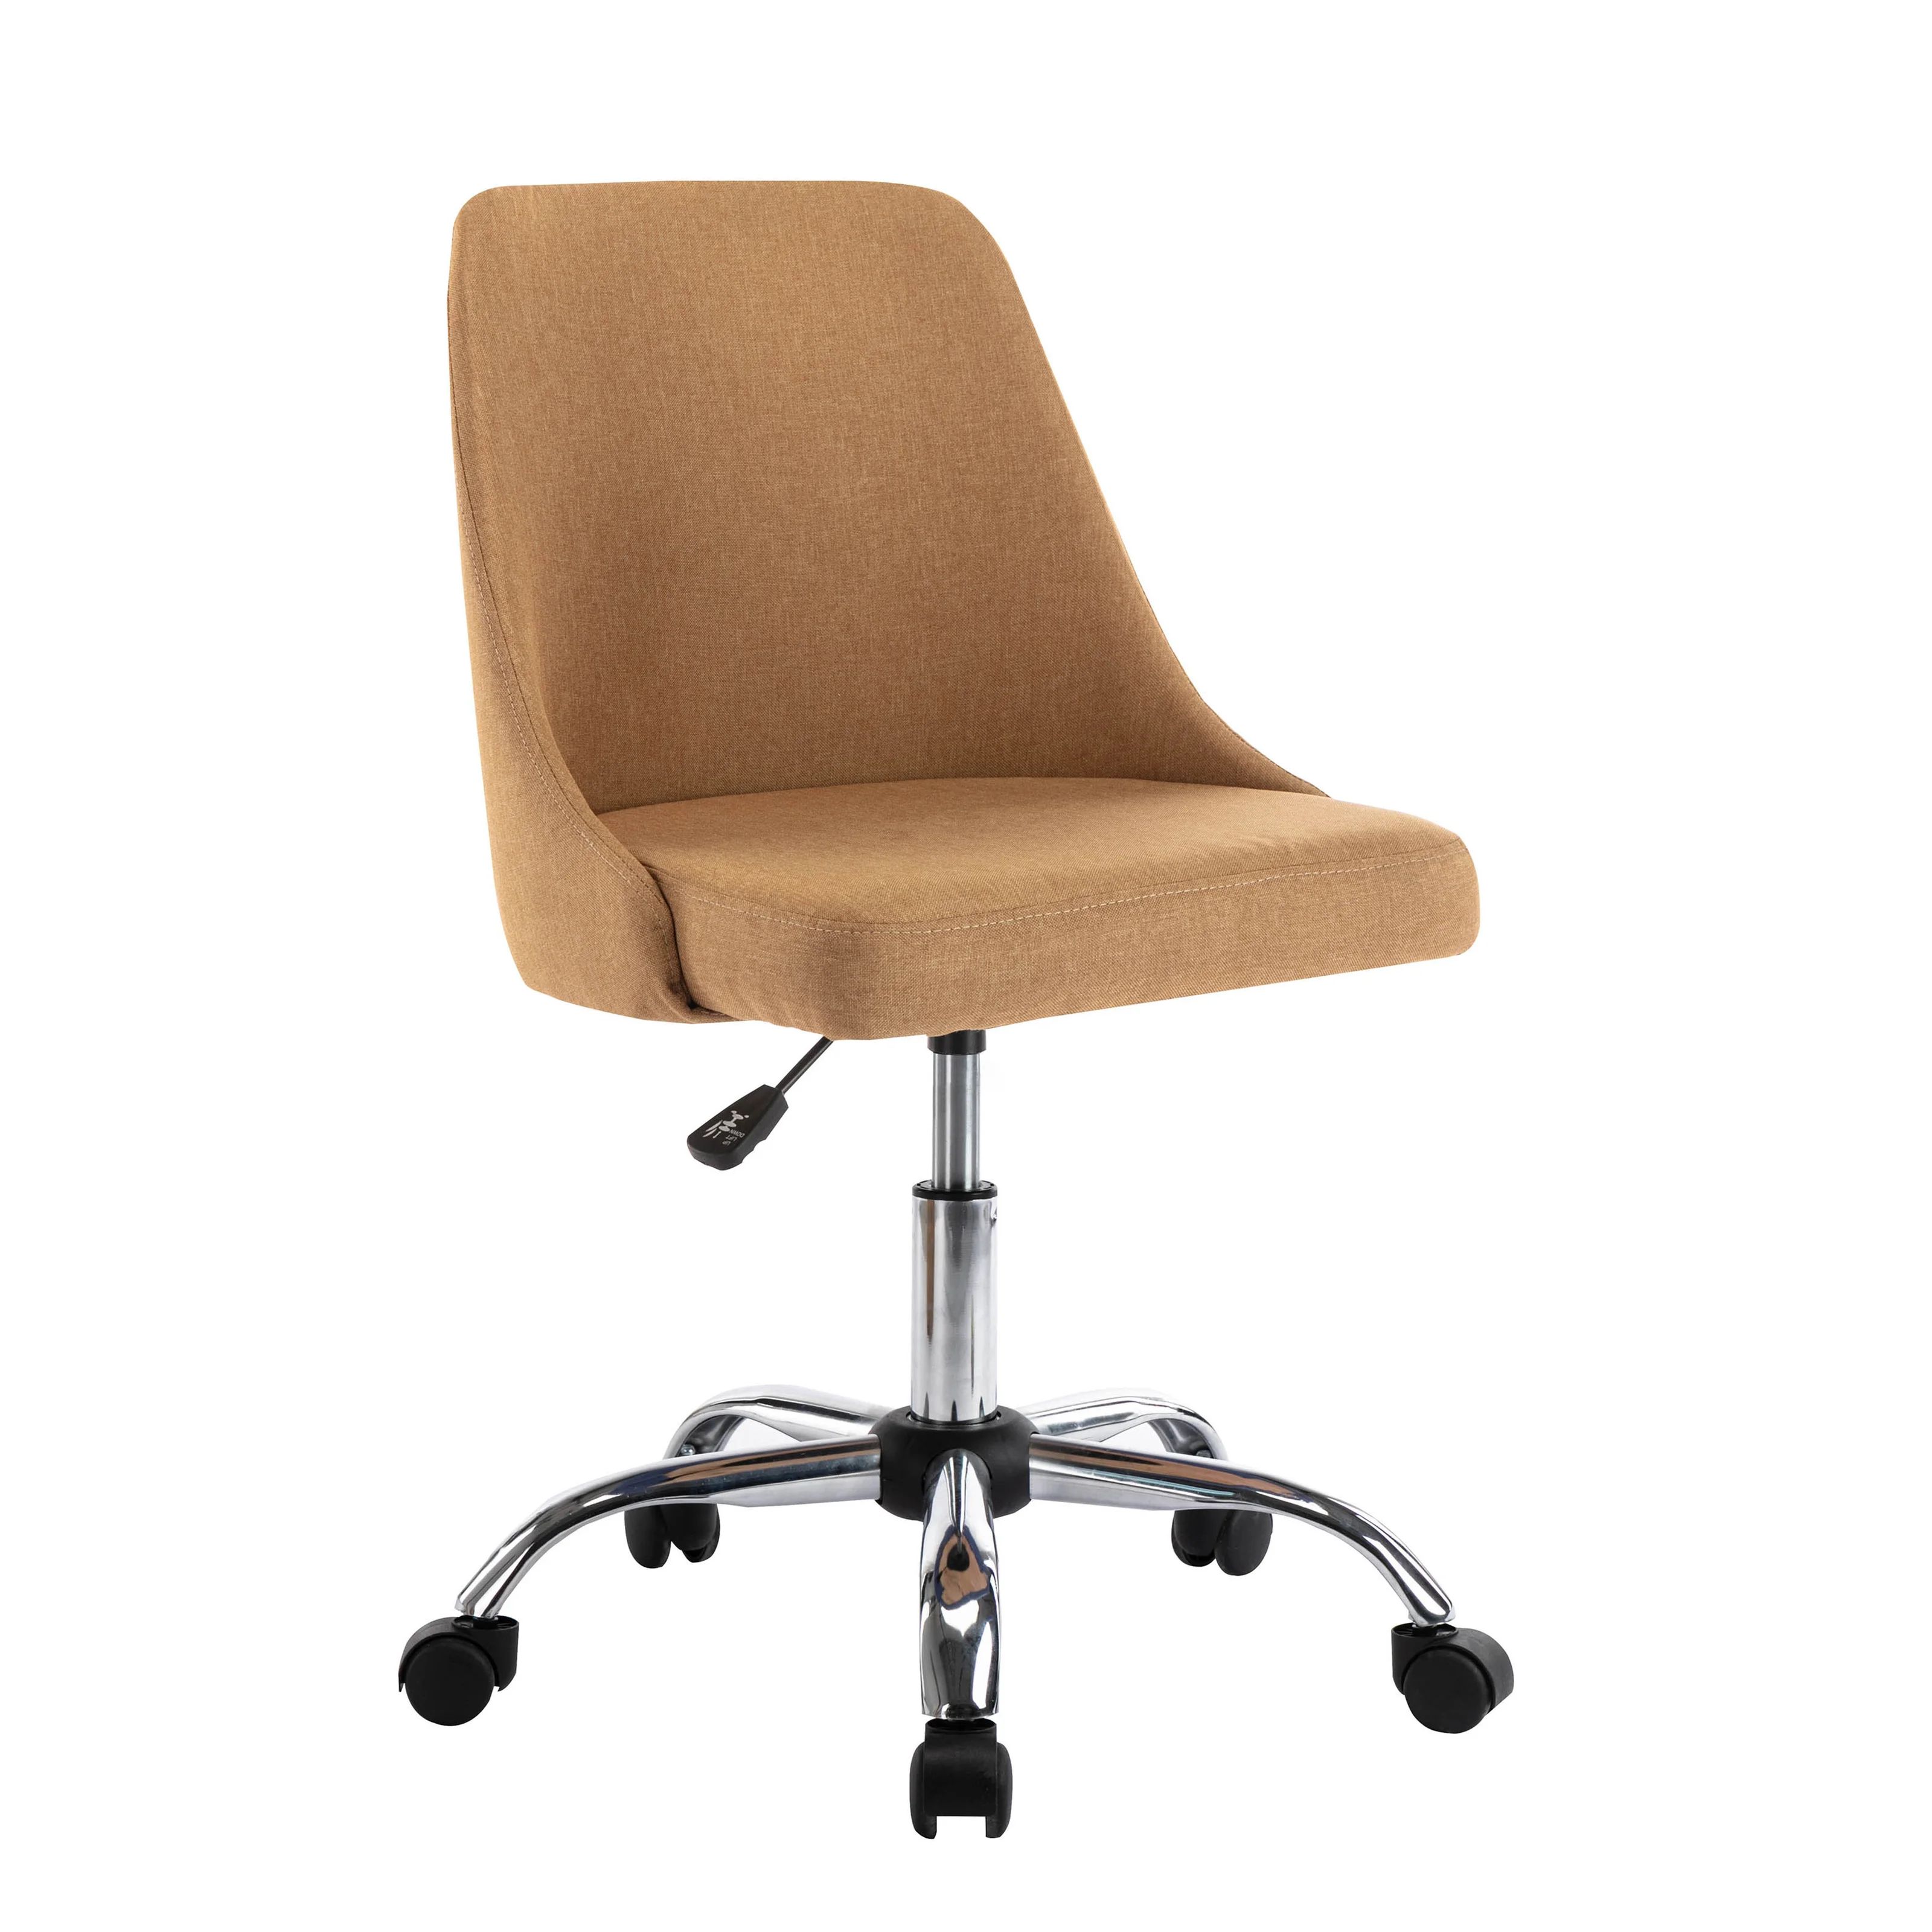 Natalia Fabric Upholstered Office Chair with Chrome Base | Wayfair North America